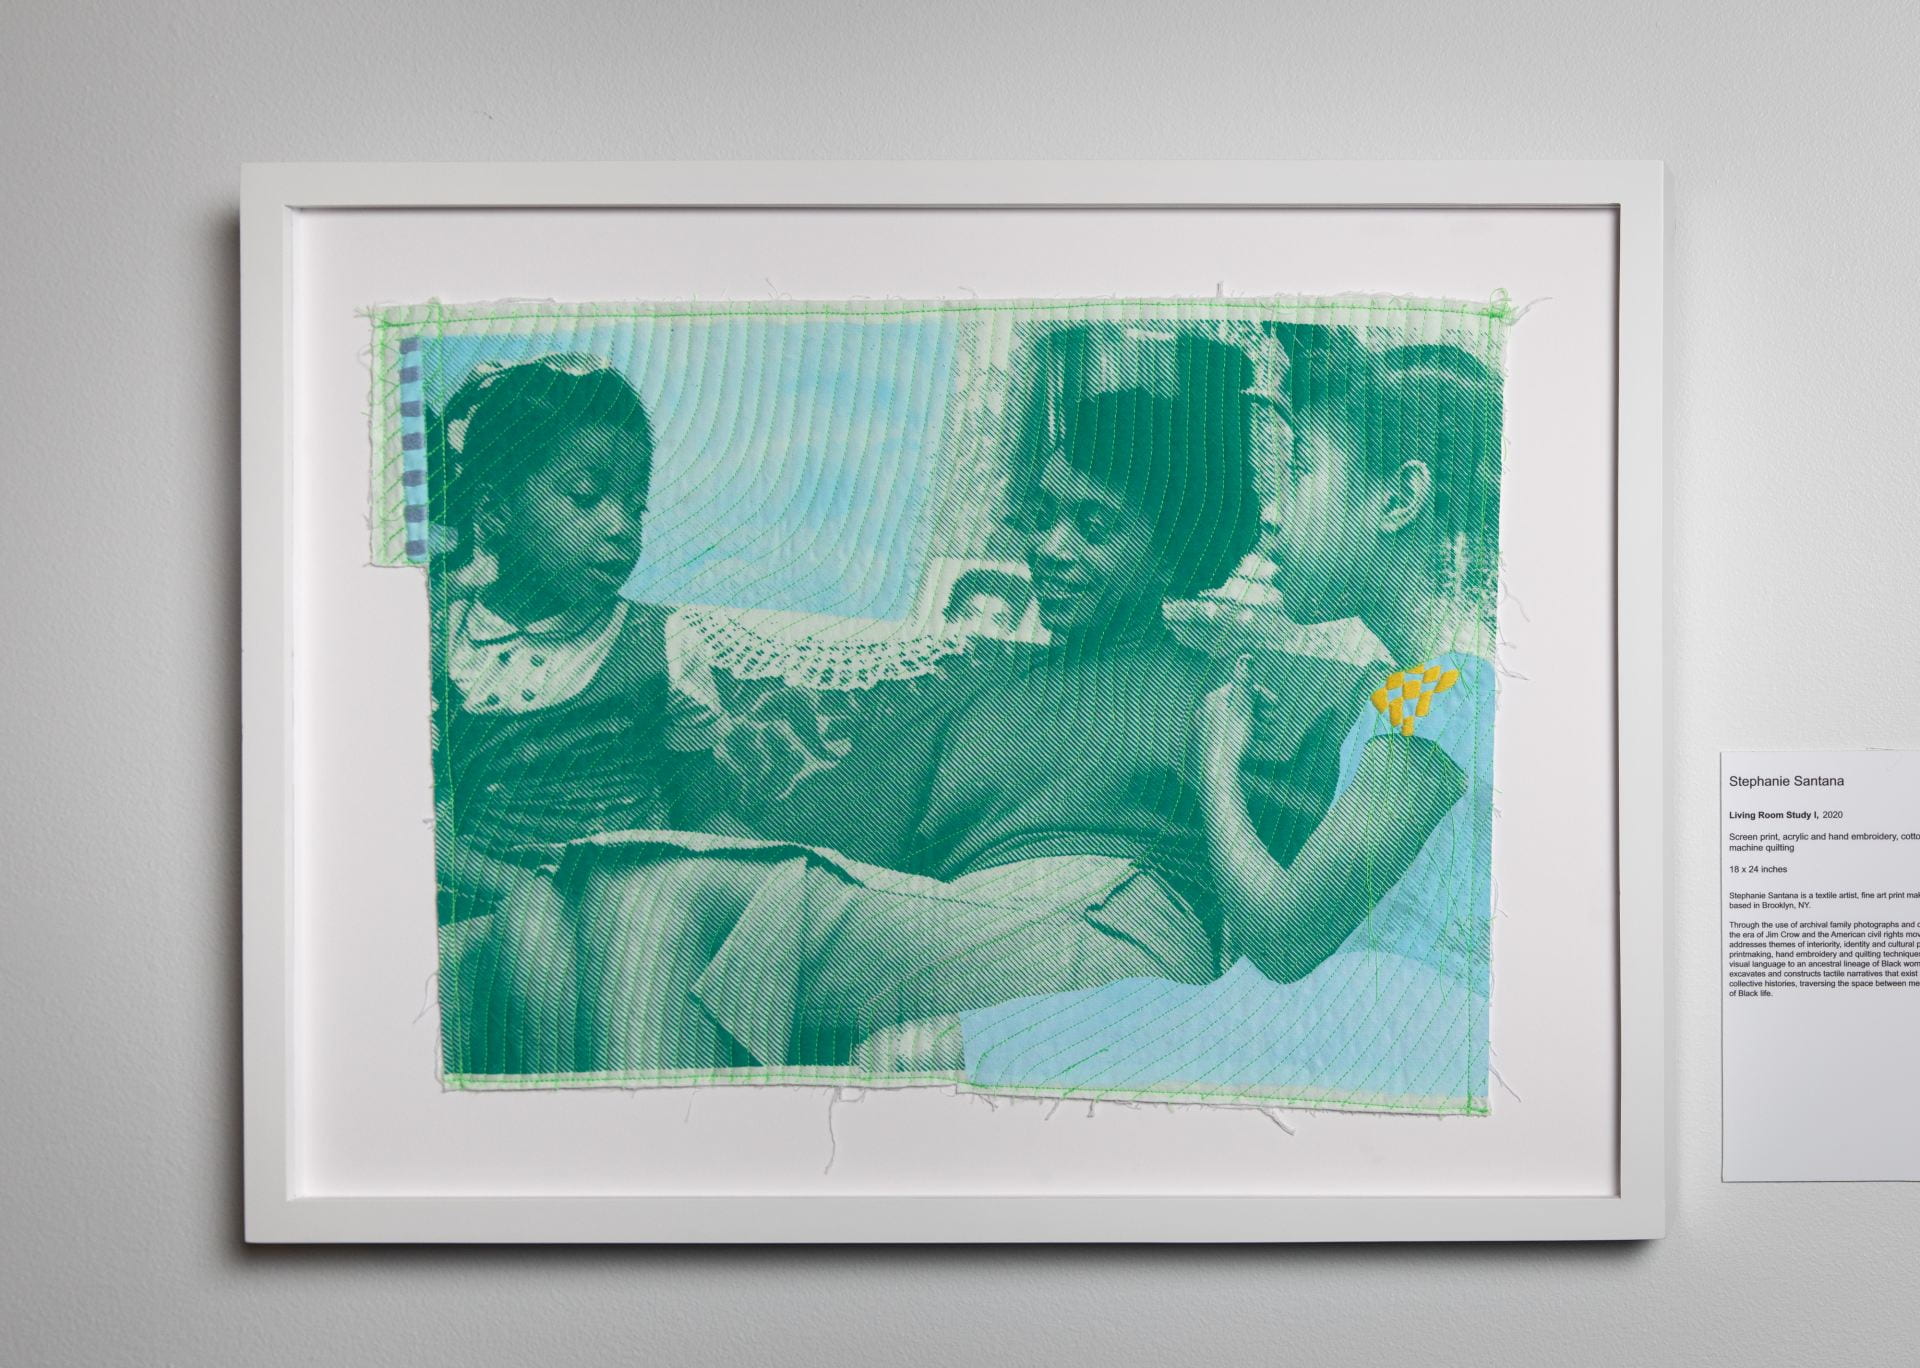 A black woman sitting between two black children, all printed on green and blue quilted cloth with yellow embroidery on one child's dress. There is a doiley on the back of the floral couch that the girls are sitting on. 